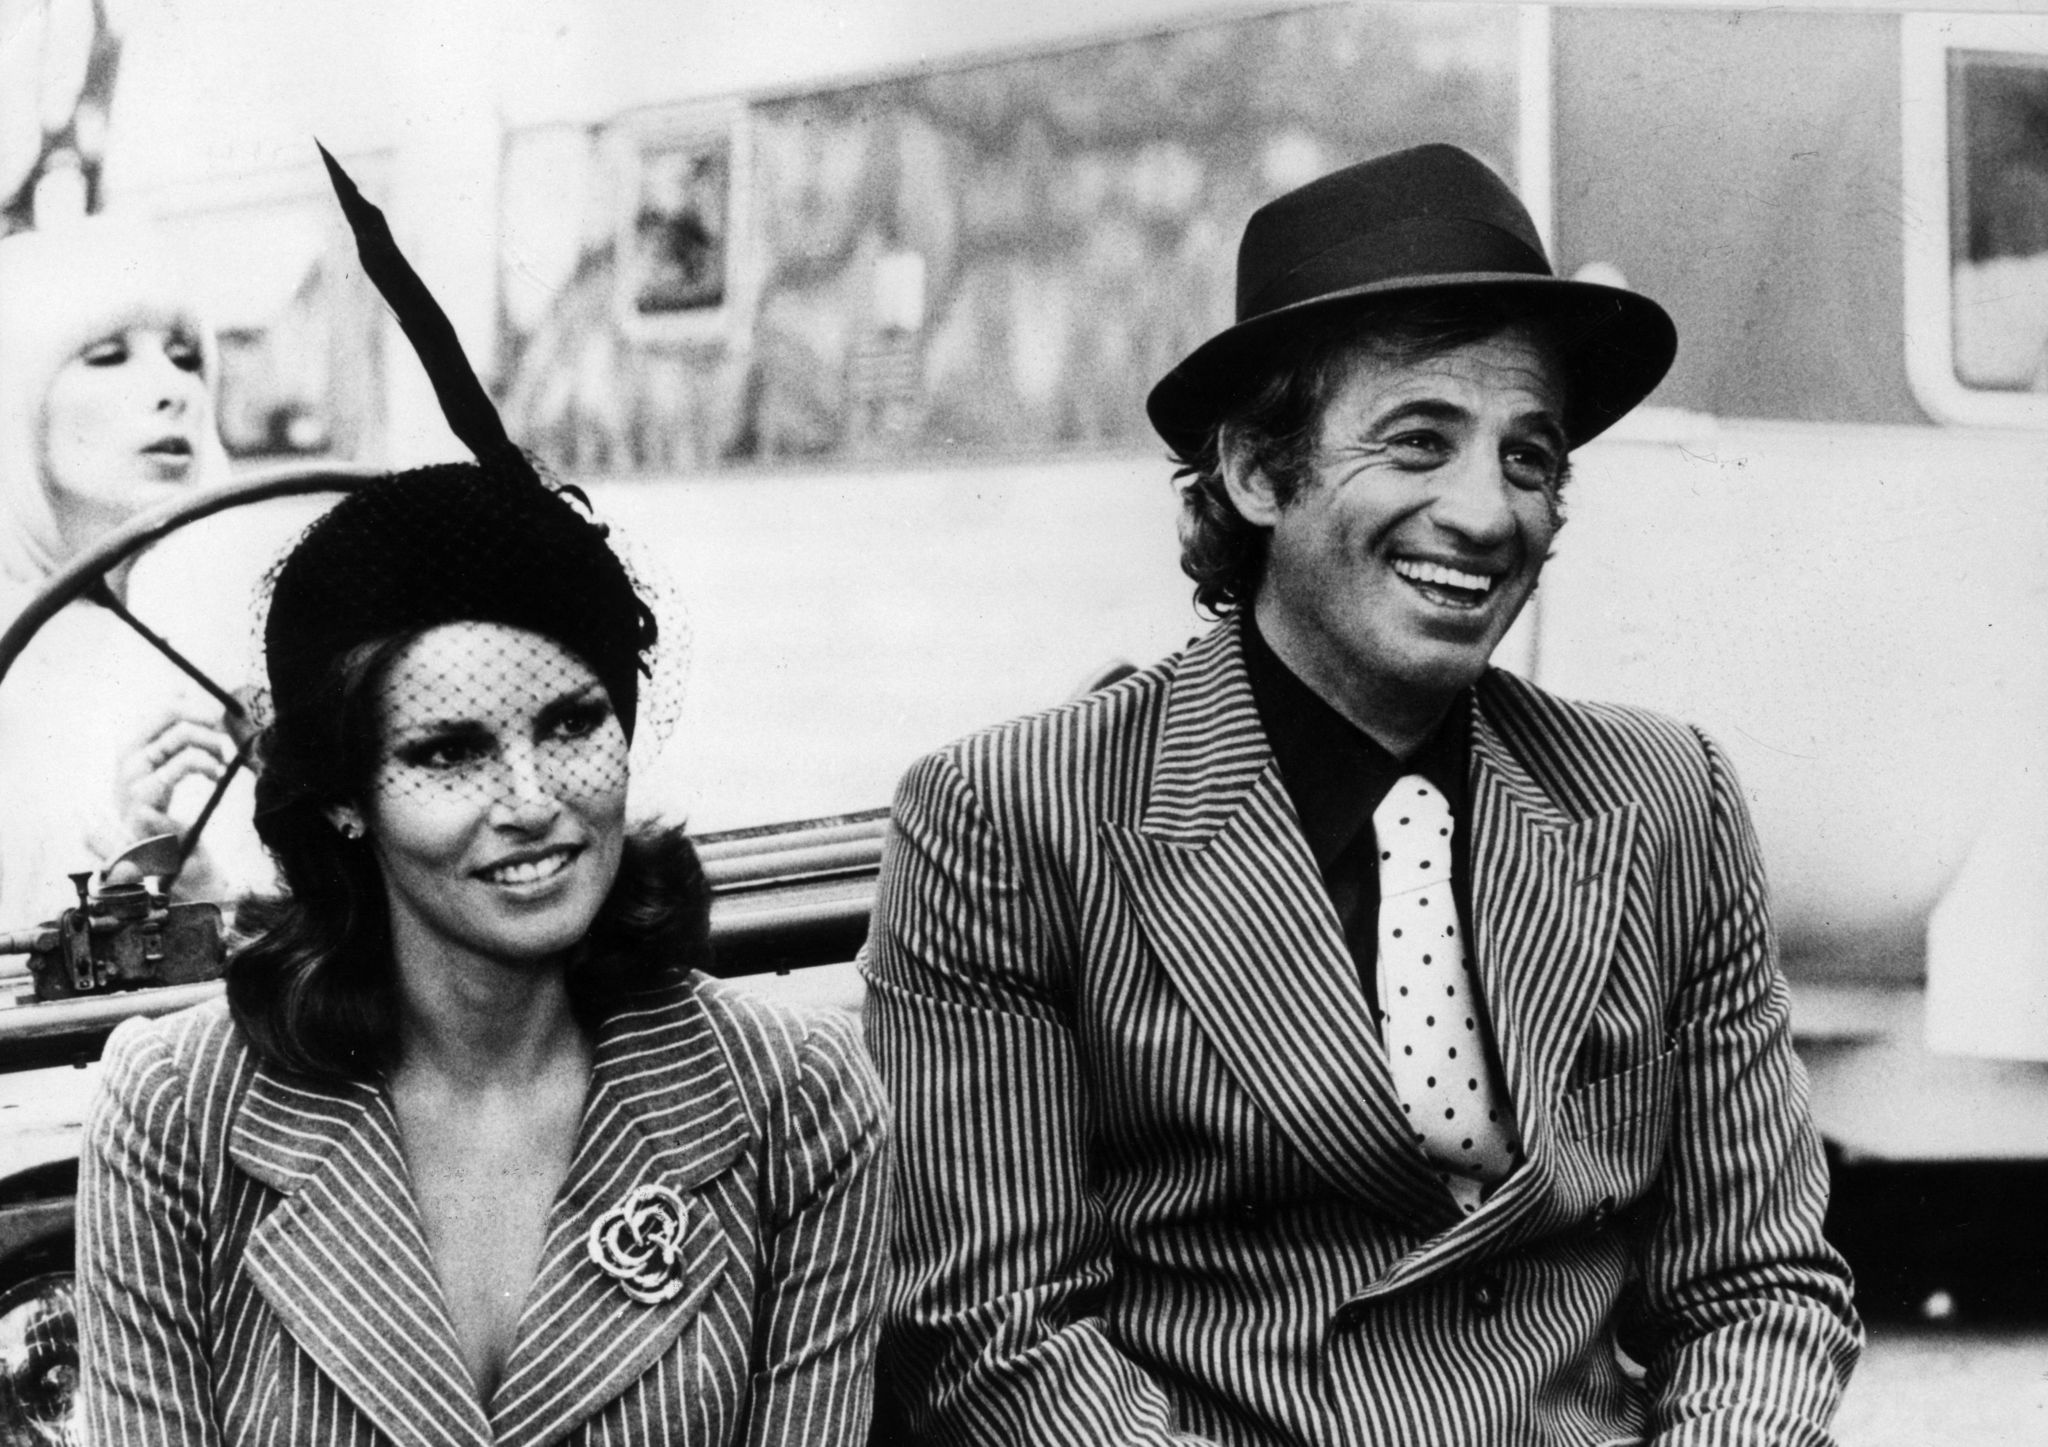 3rd October 1977: French film actor Jean-Paul Belmondo with actress Raquel Welch.